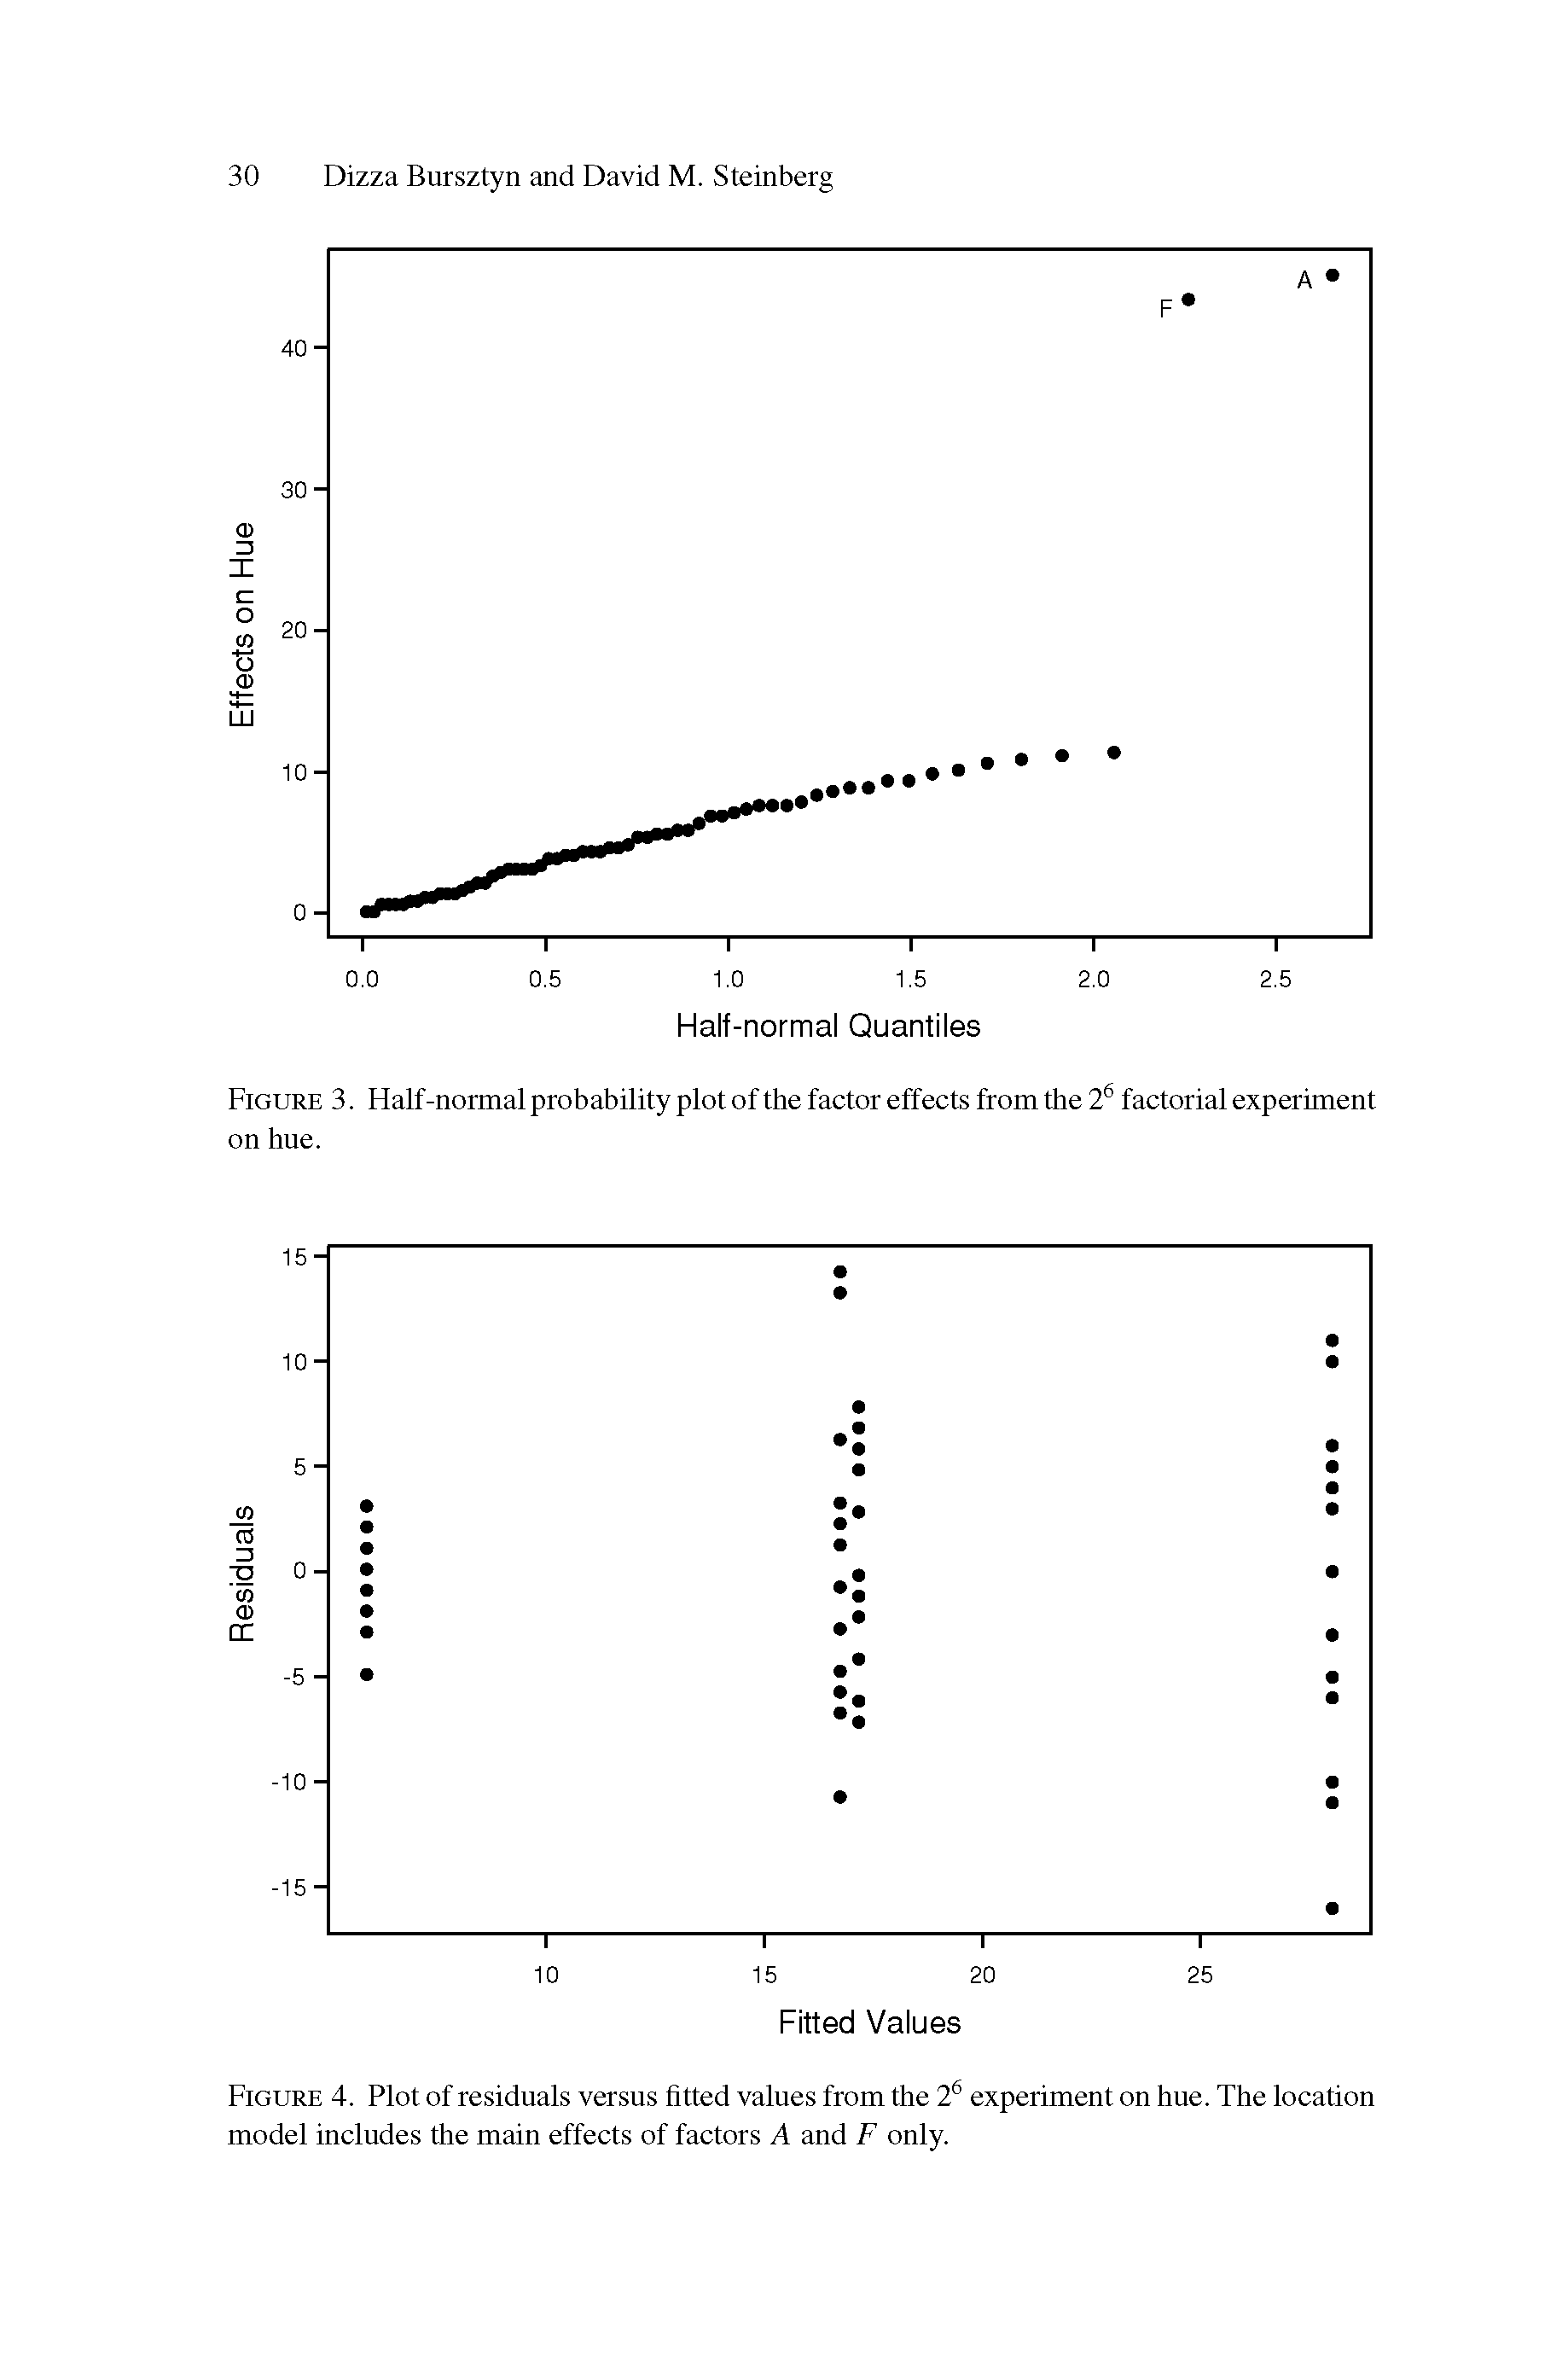 Figure 4. Plot of residuals versus fitted values from the 2s experiment on hue. The location model includes the main effects of factors A and F only.